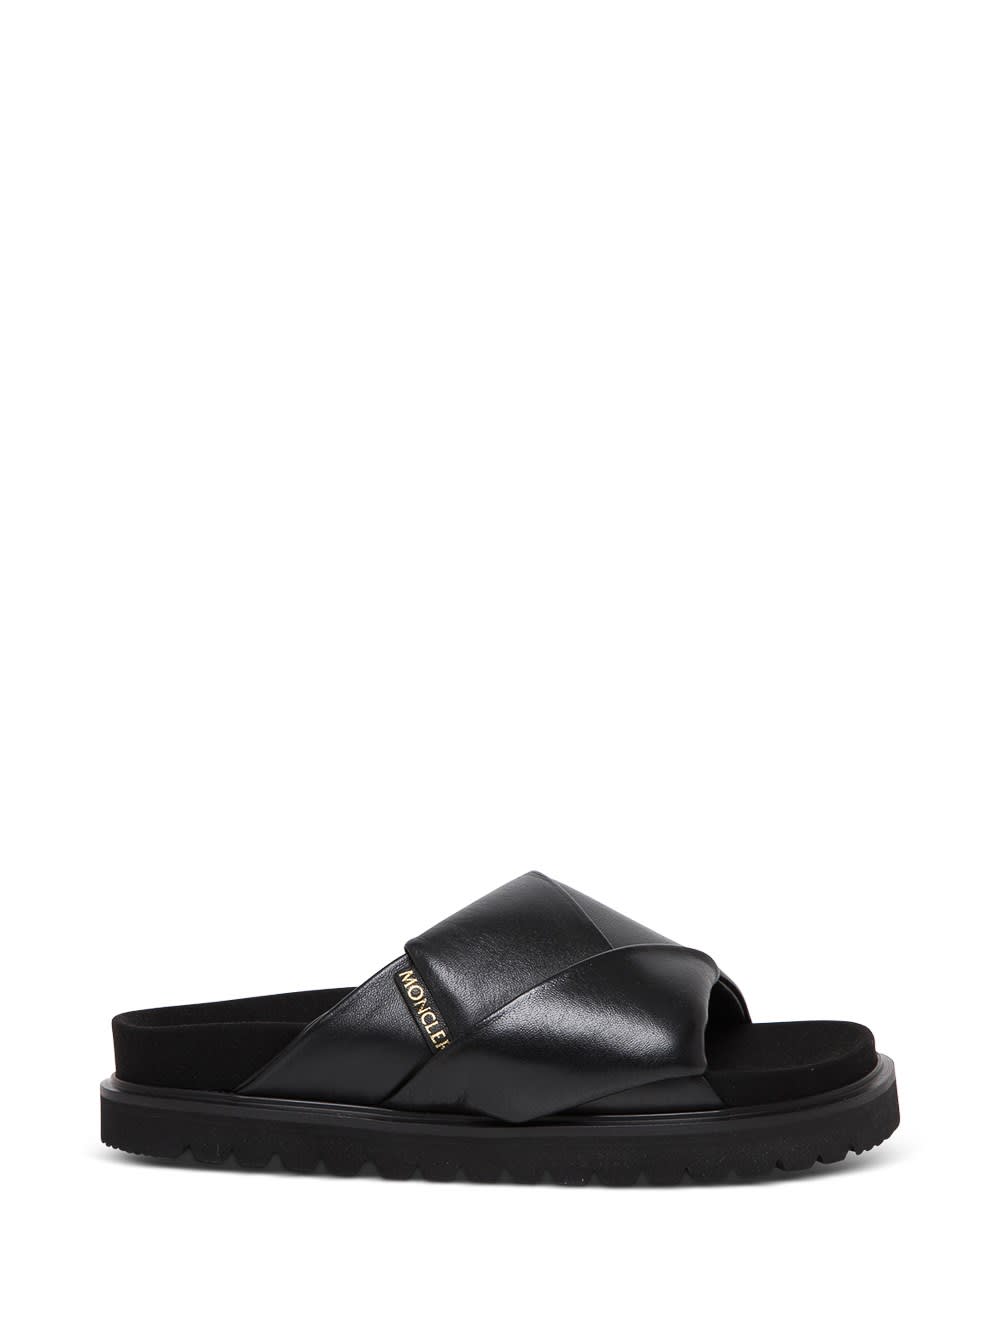 Buy Moncler Black Woven Leather Sandals online, shop Moncler shoes with free shipping